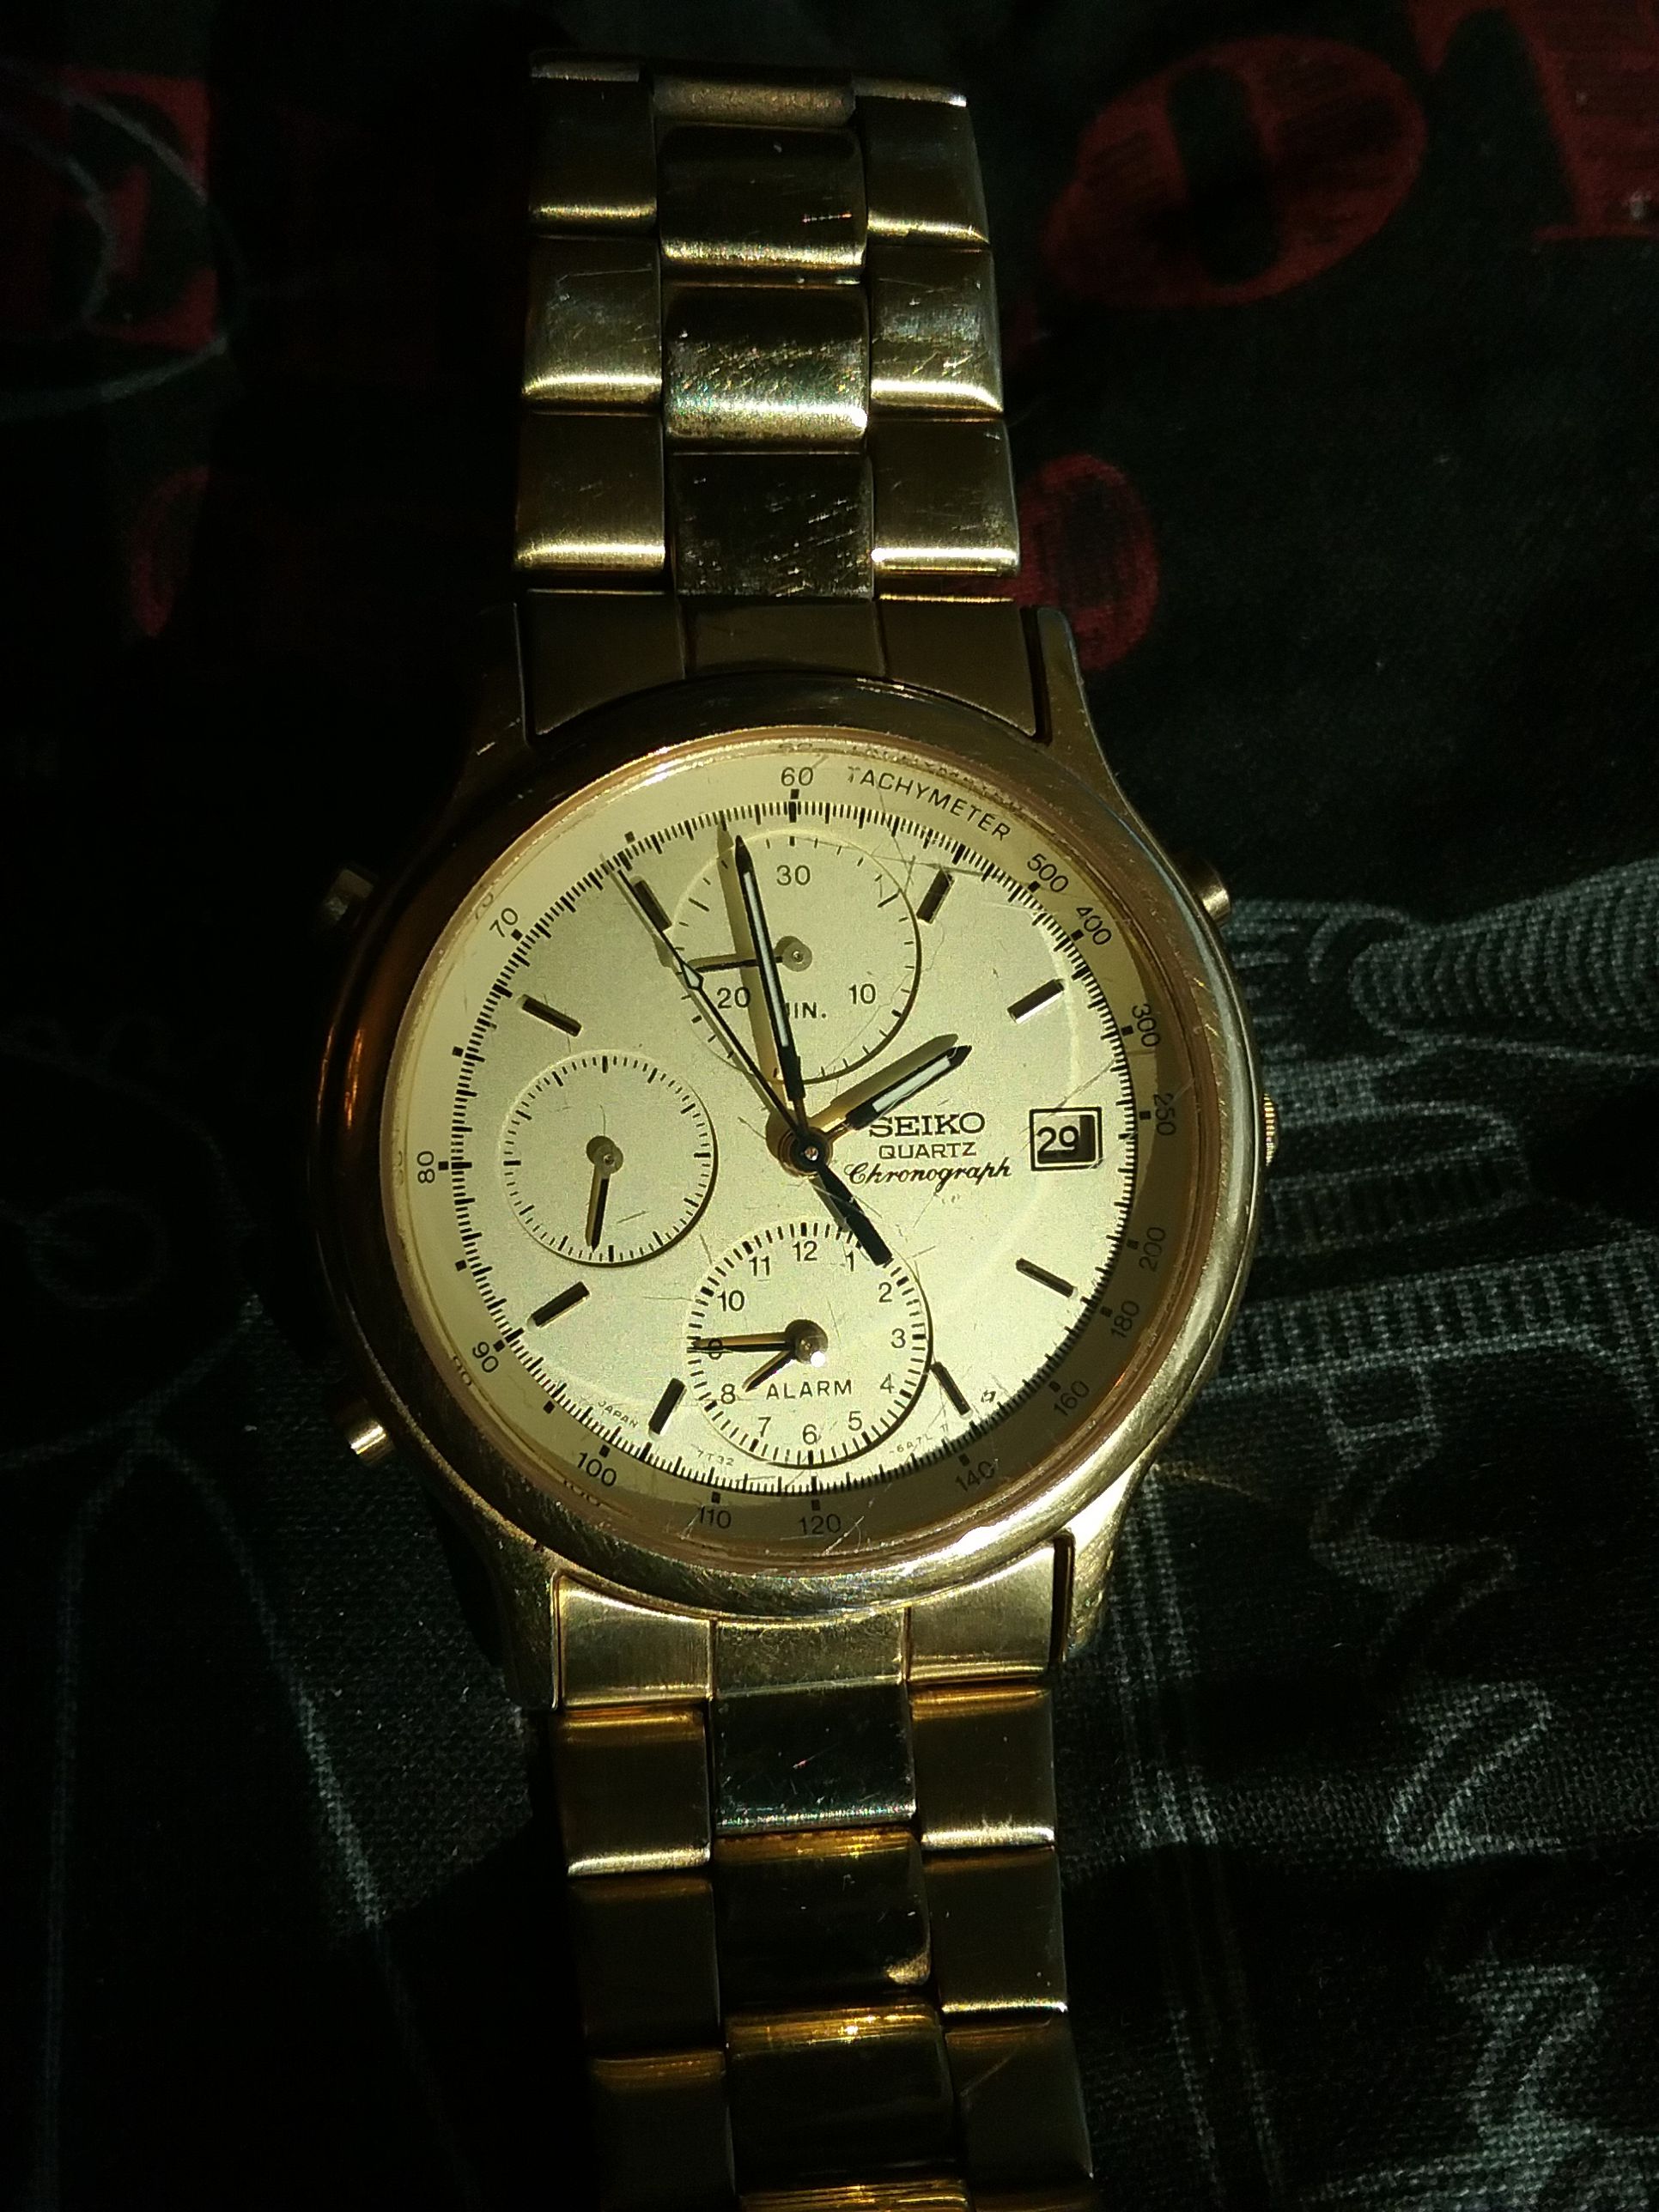 7T32-6A50 Chronograph wrist watch for Sale in Freeport, FL - OfferUp